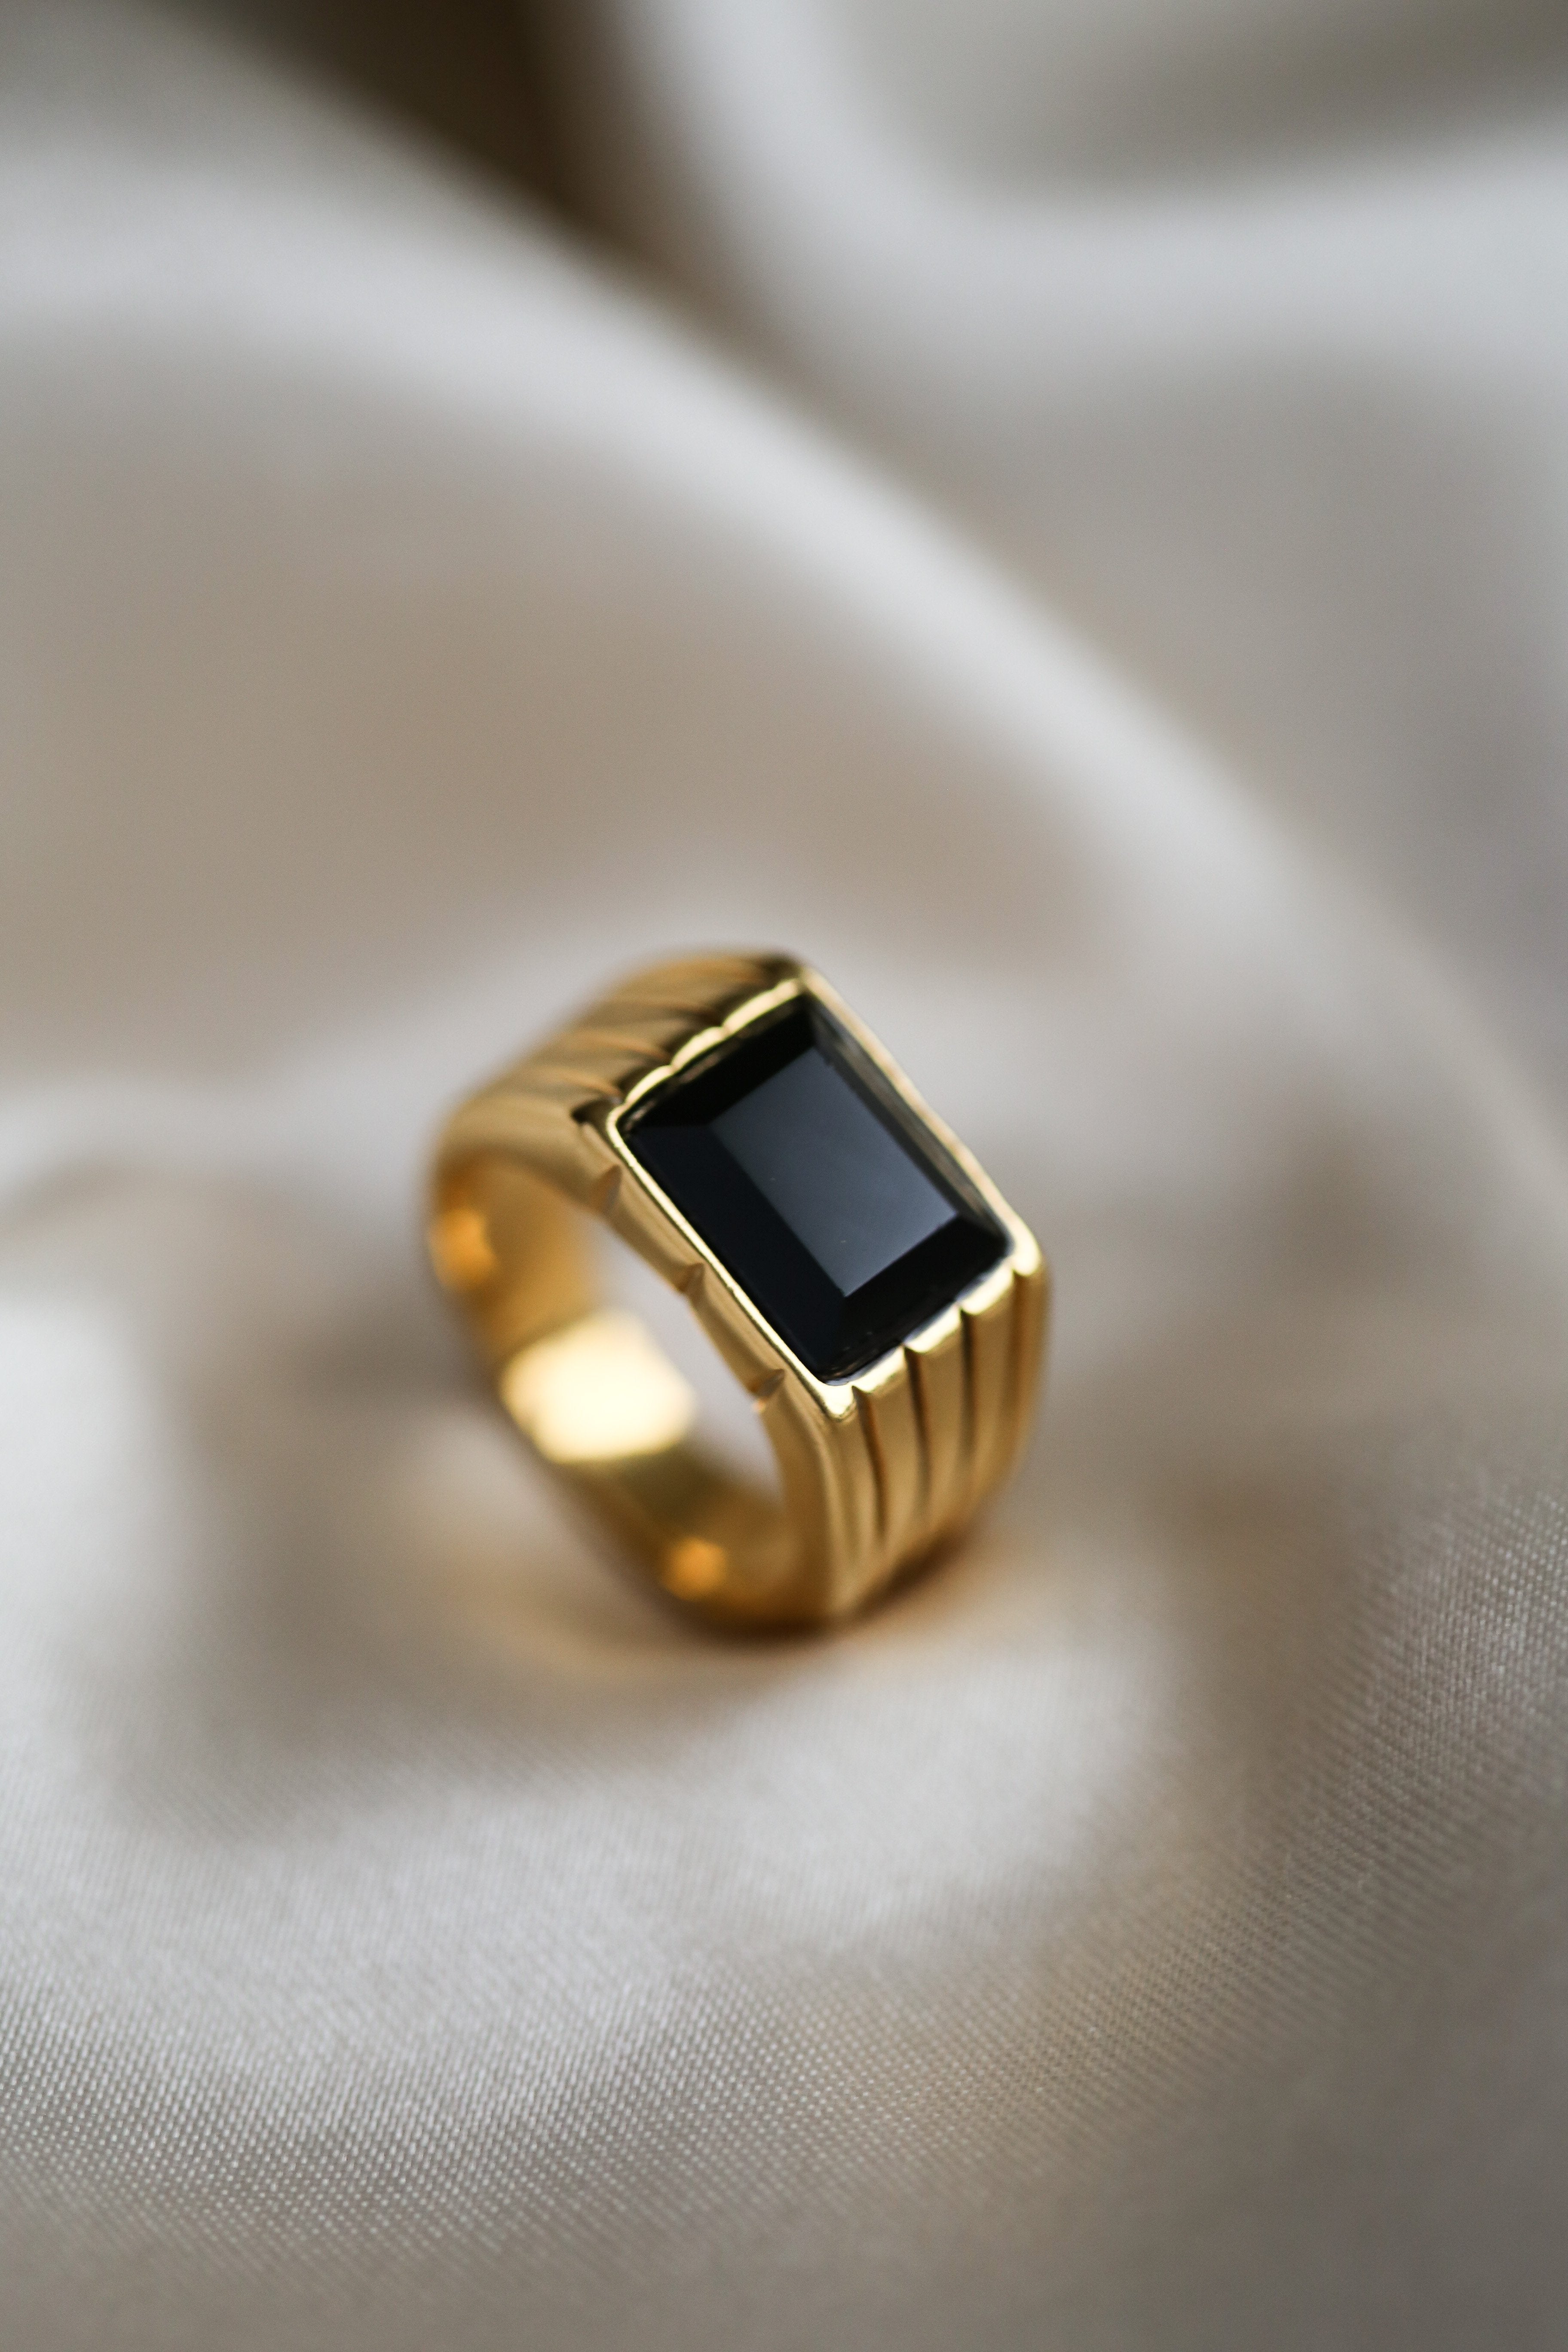 Firenze Ring - Boutique Minimaliste has waterproof, durable, elegant and vintage inspired jewelry